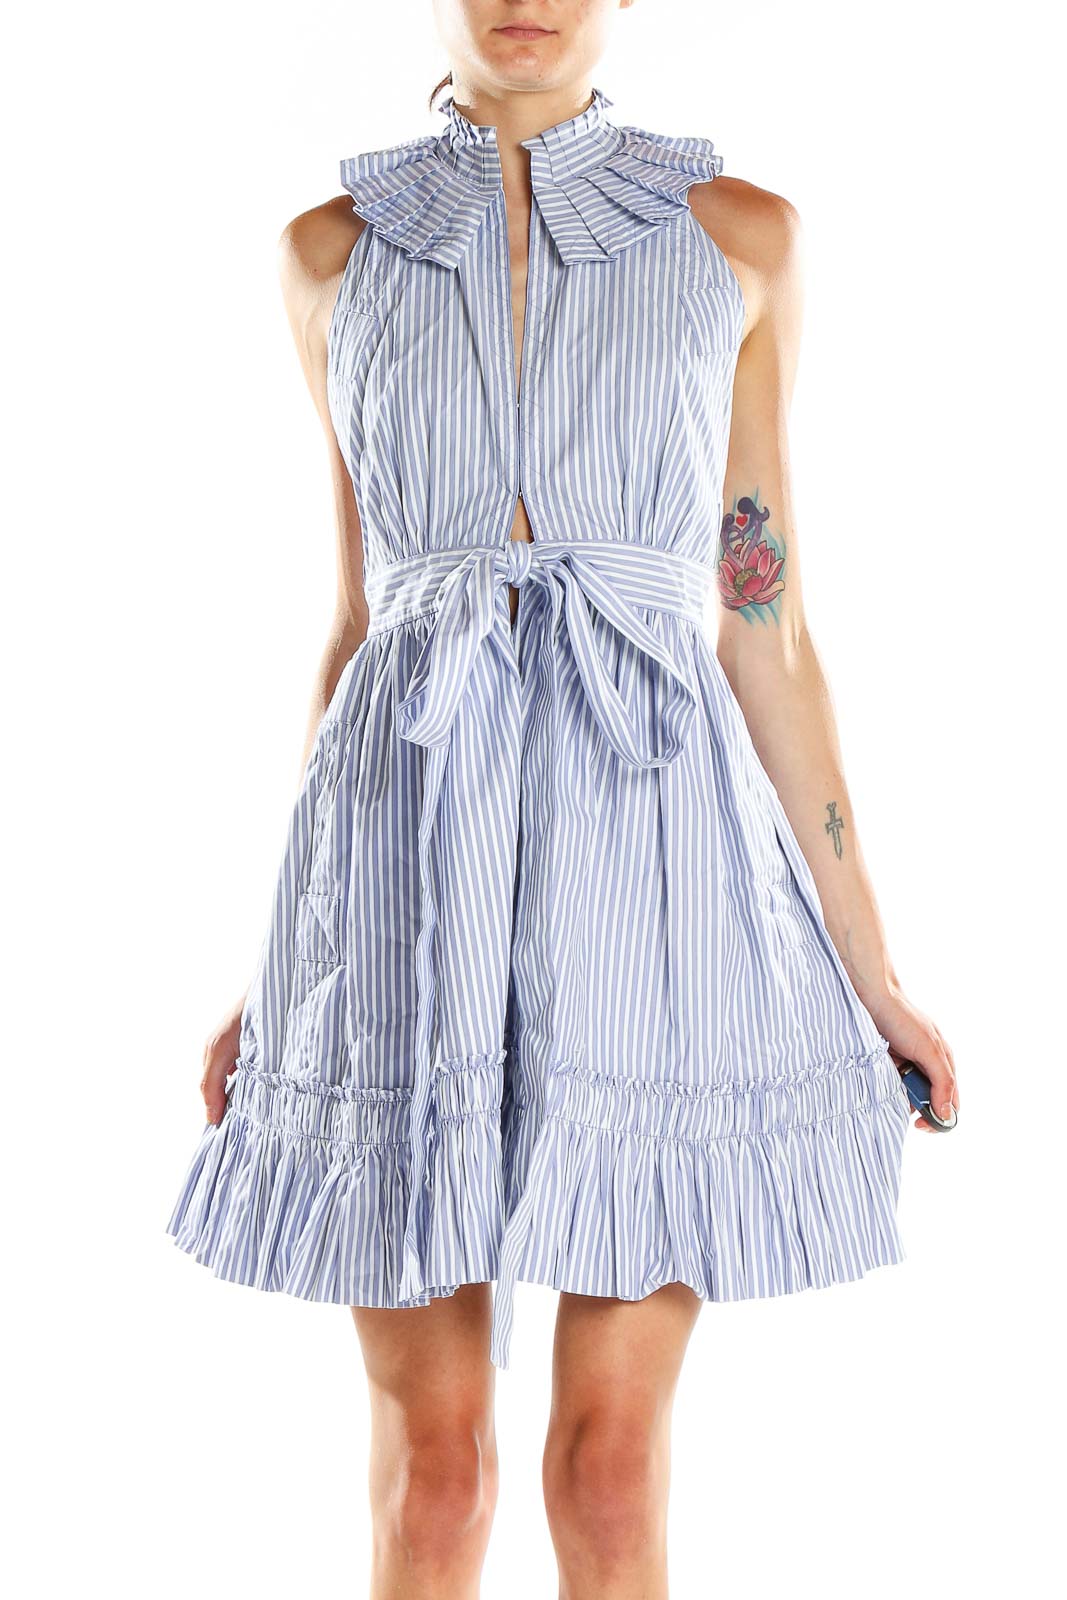 Blue Striped Chic Fit & Flare Dress Front